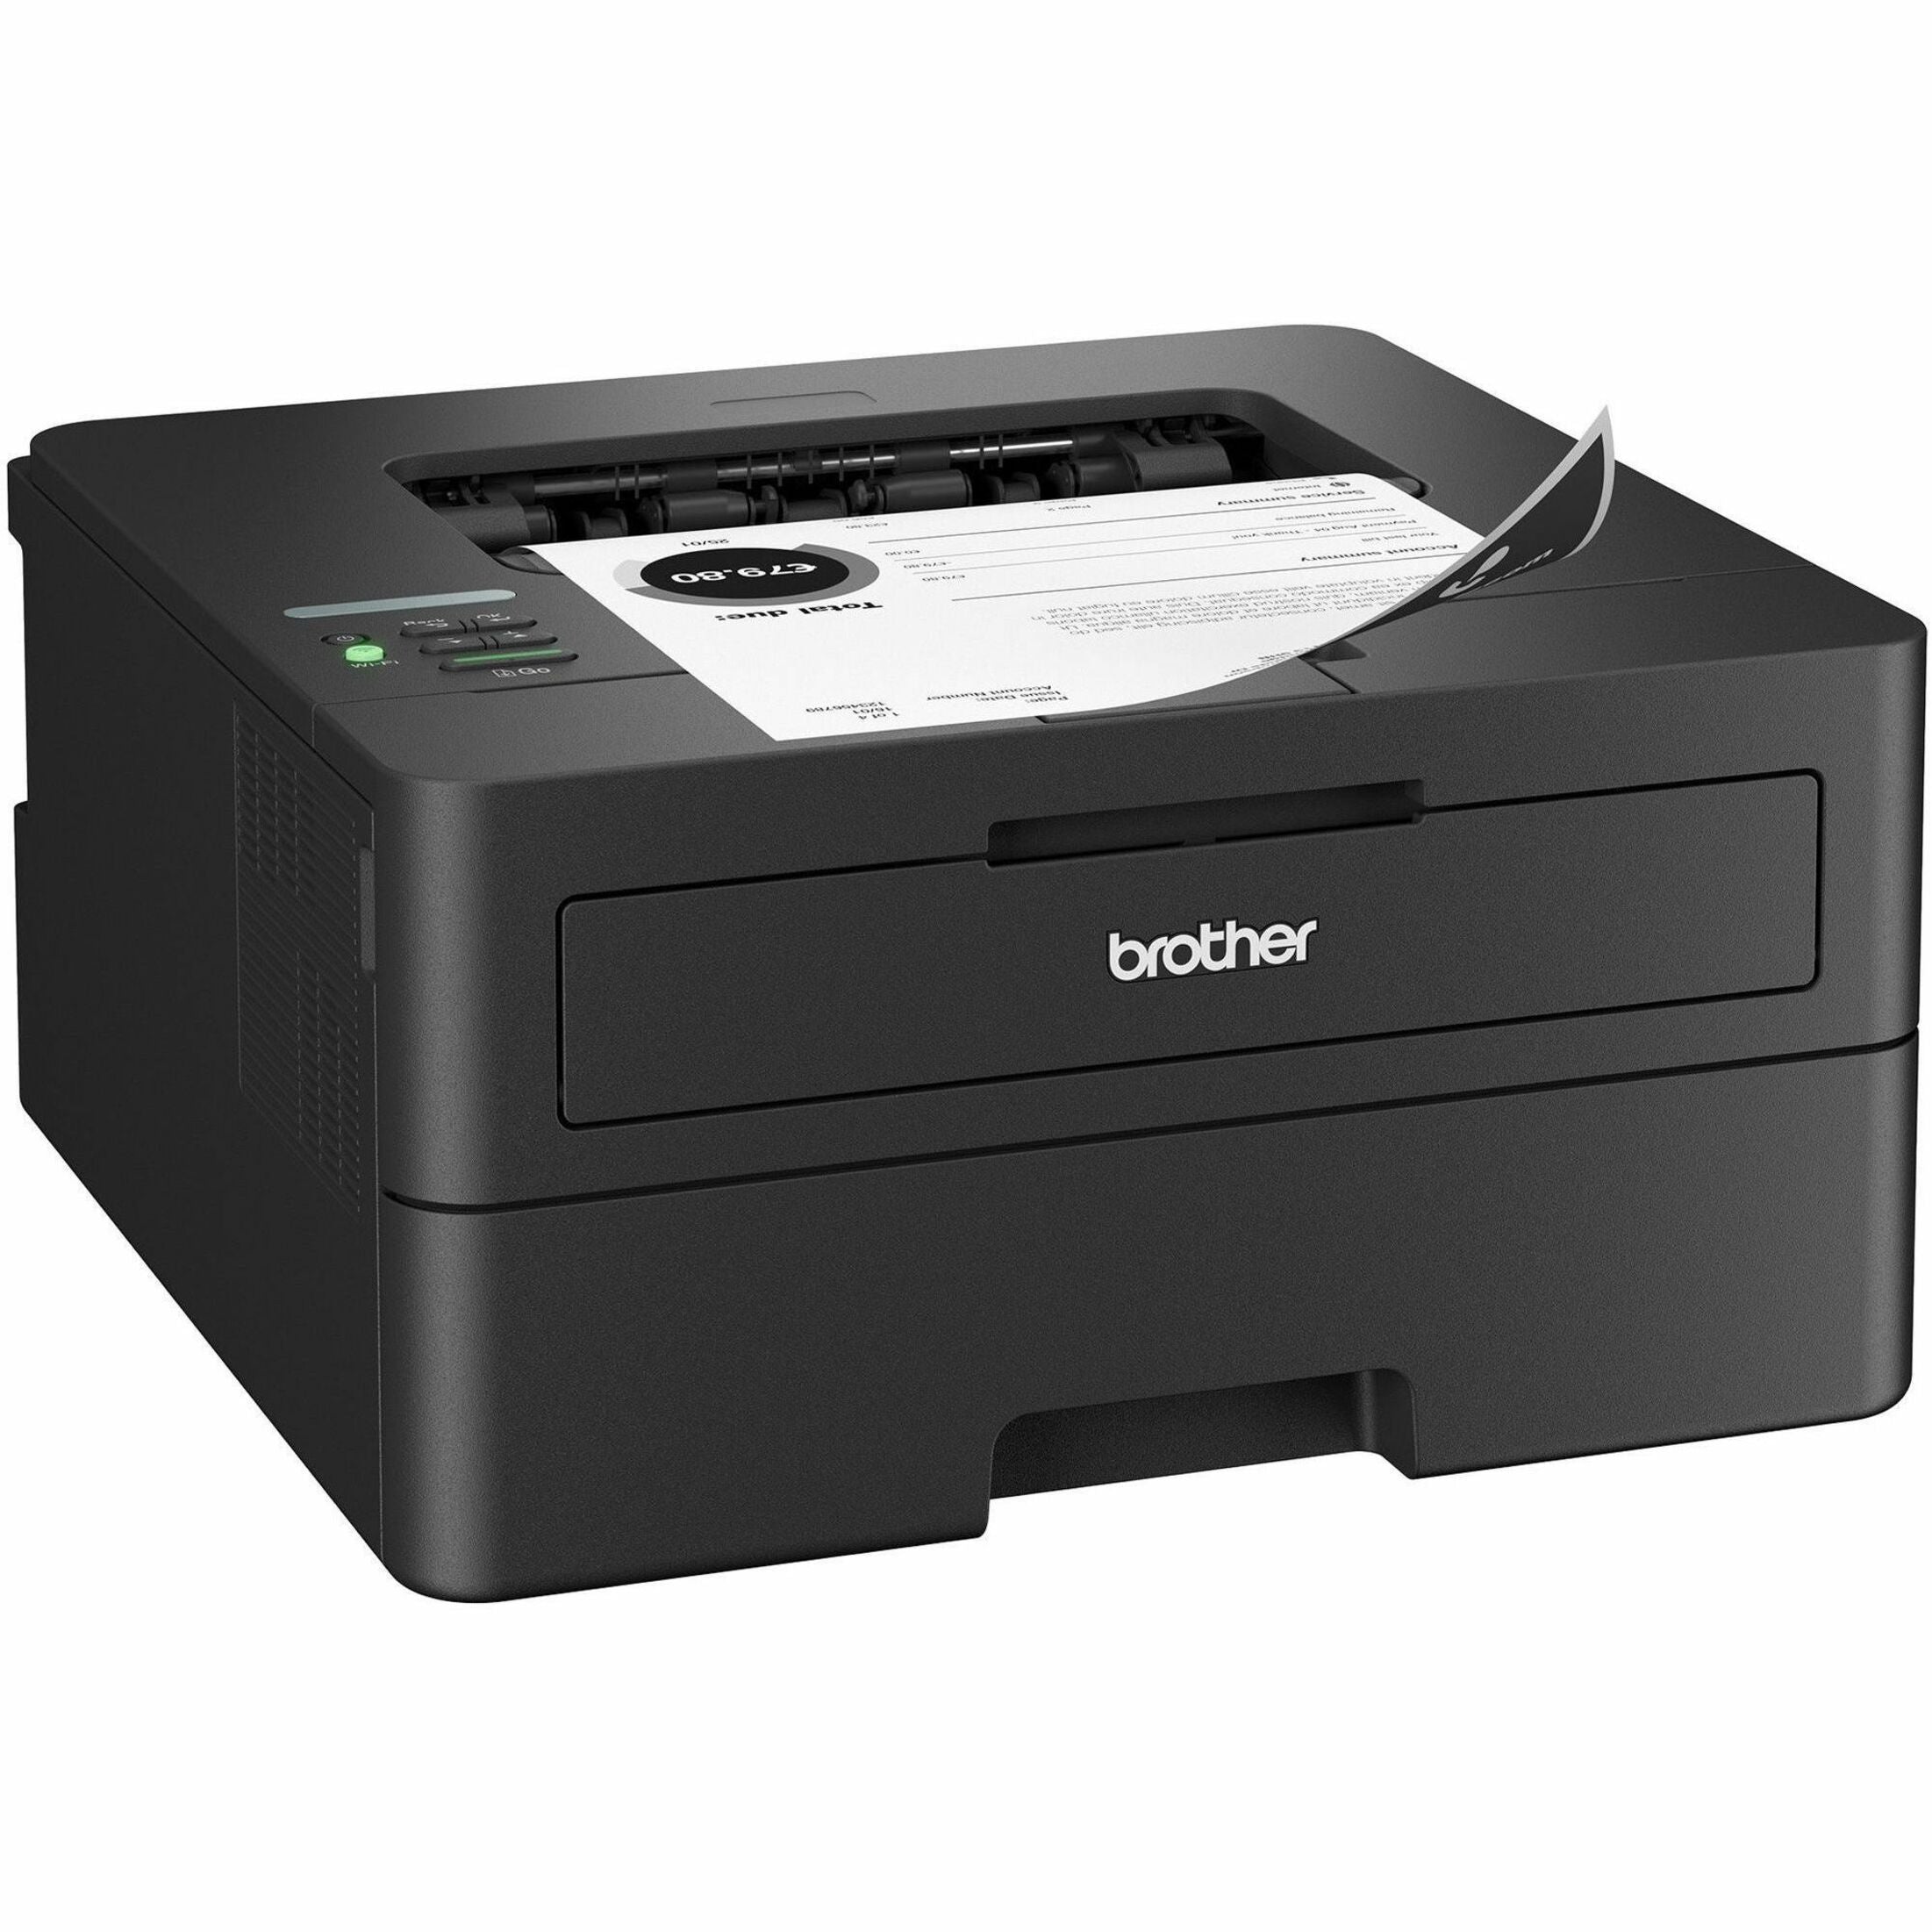 Brother HLL2460DW HL-L2460DW Wireless Compact Laser Printer, Monochrome, 36ppm, 1200 x 1200 dpi, Wired